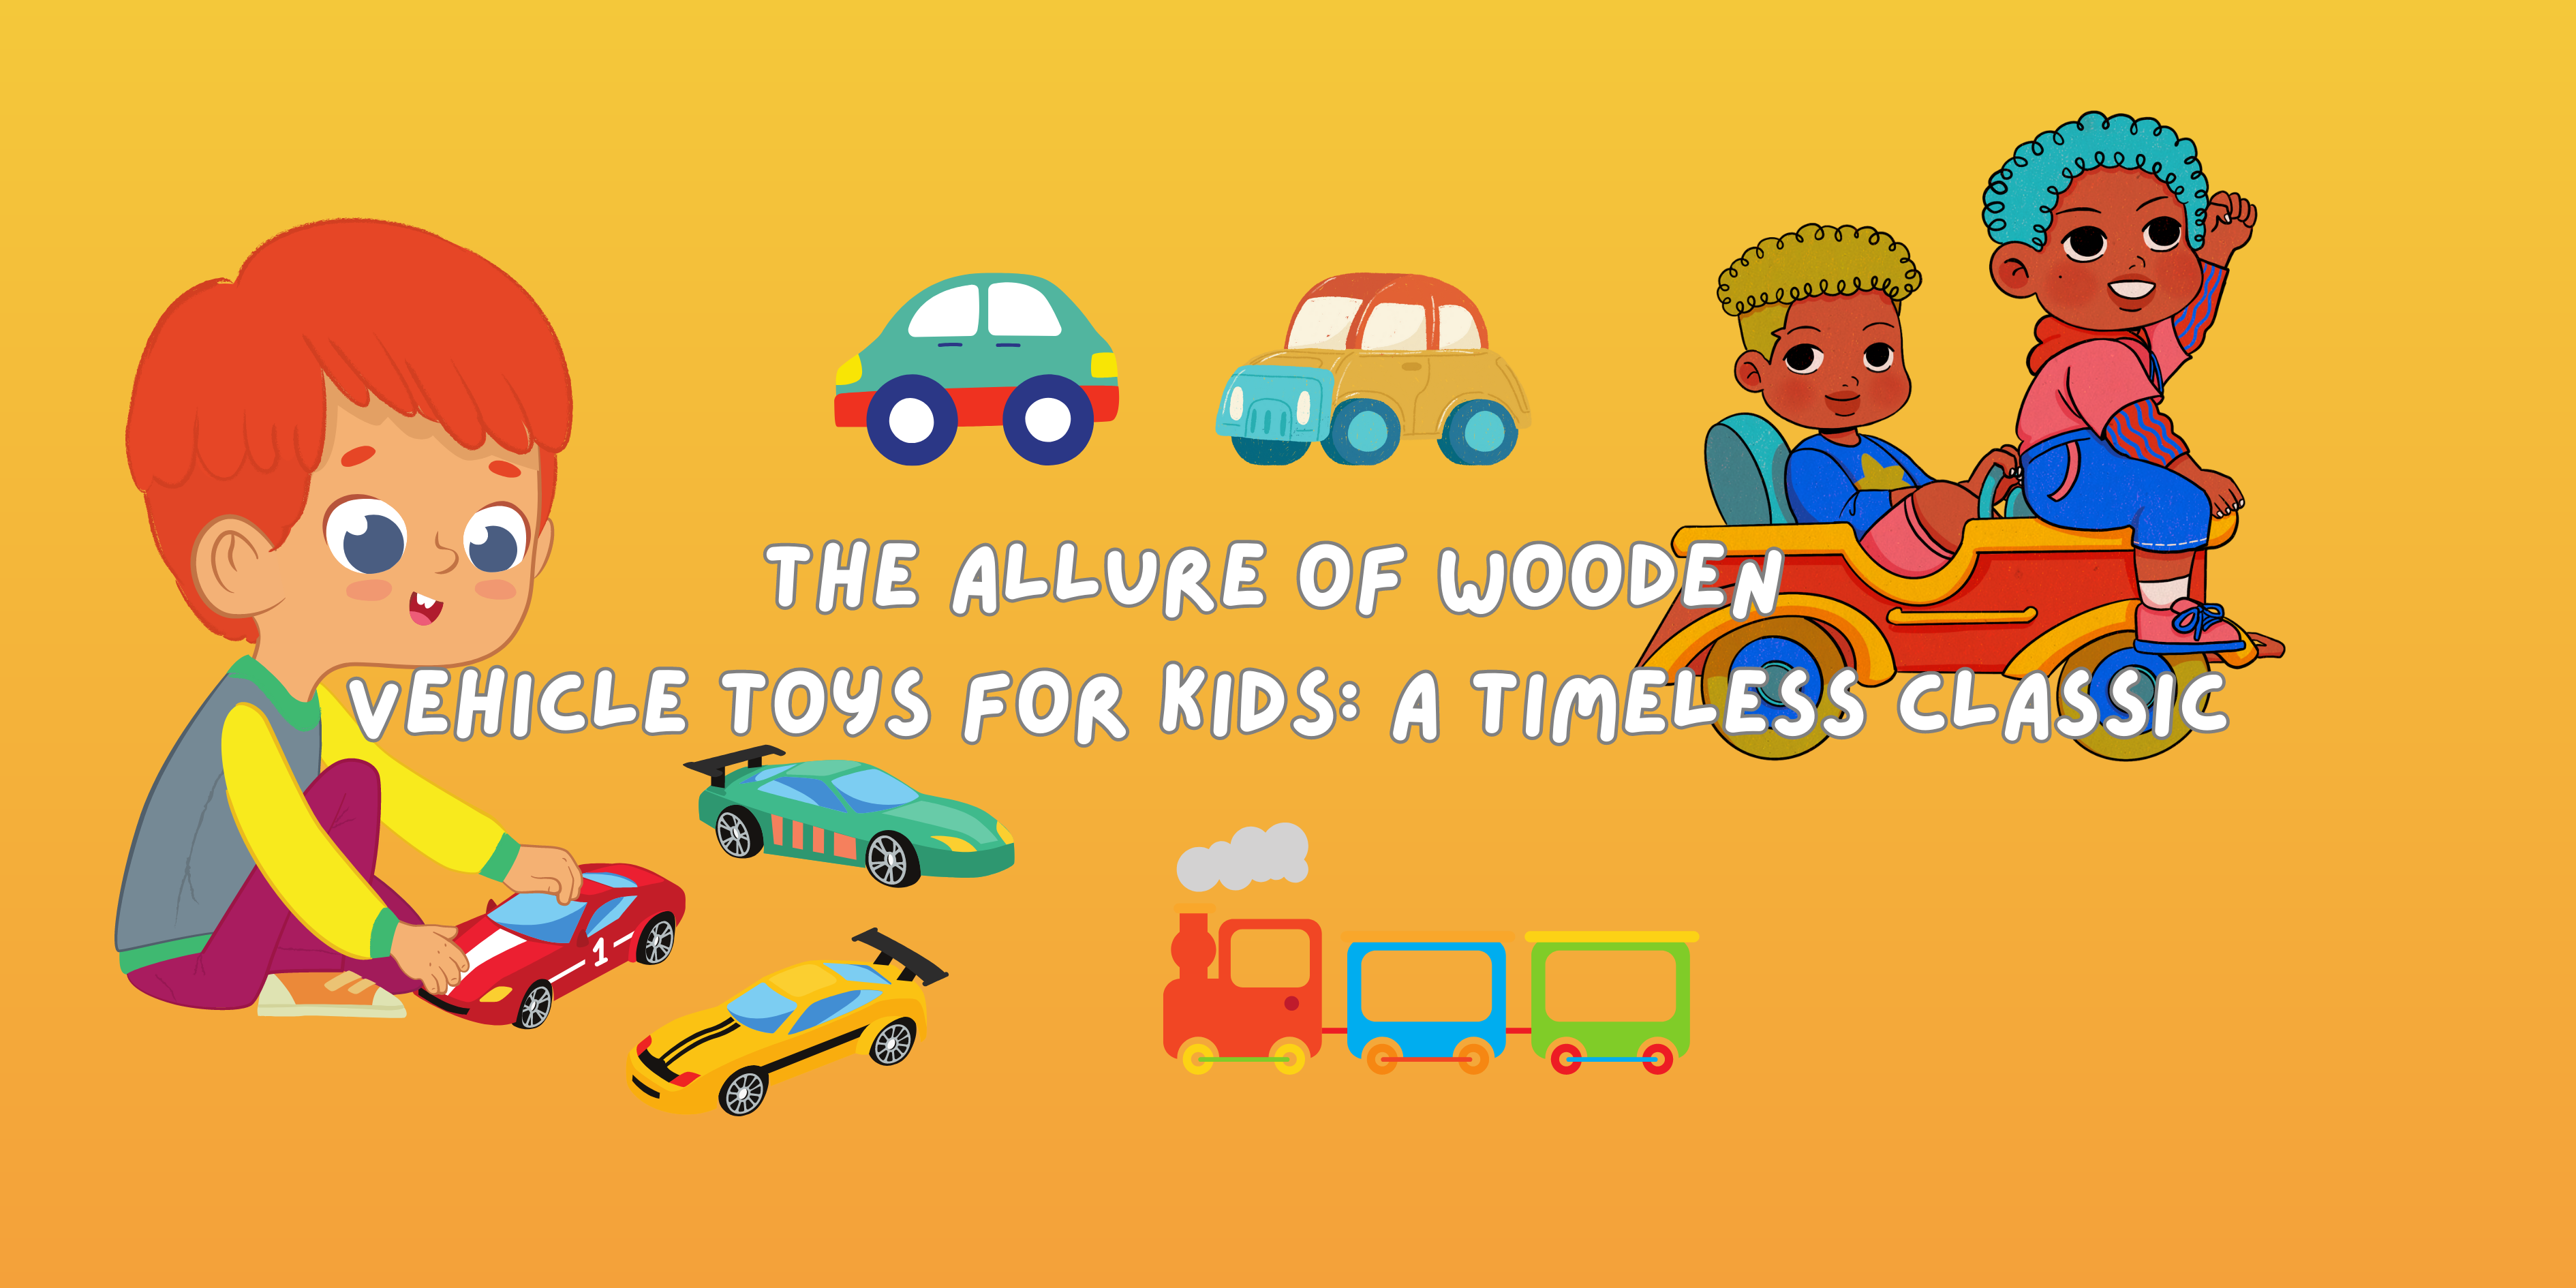 The Allure of Wooden Vehicle Toys for Kids: A Timeless Classic